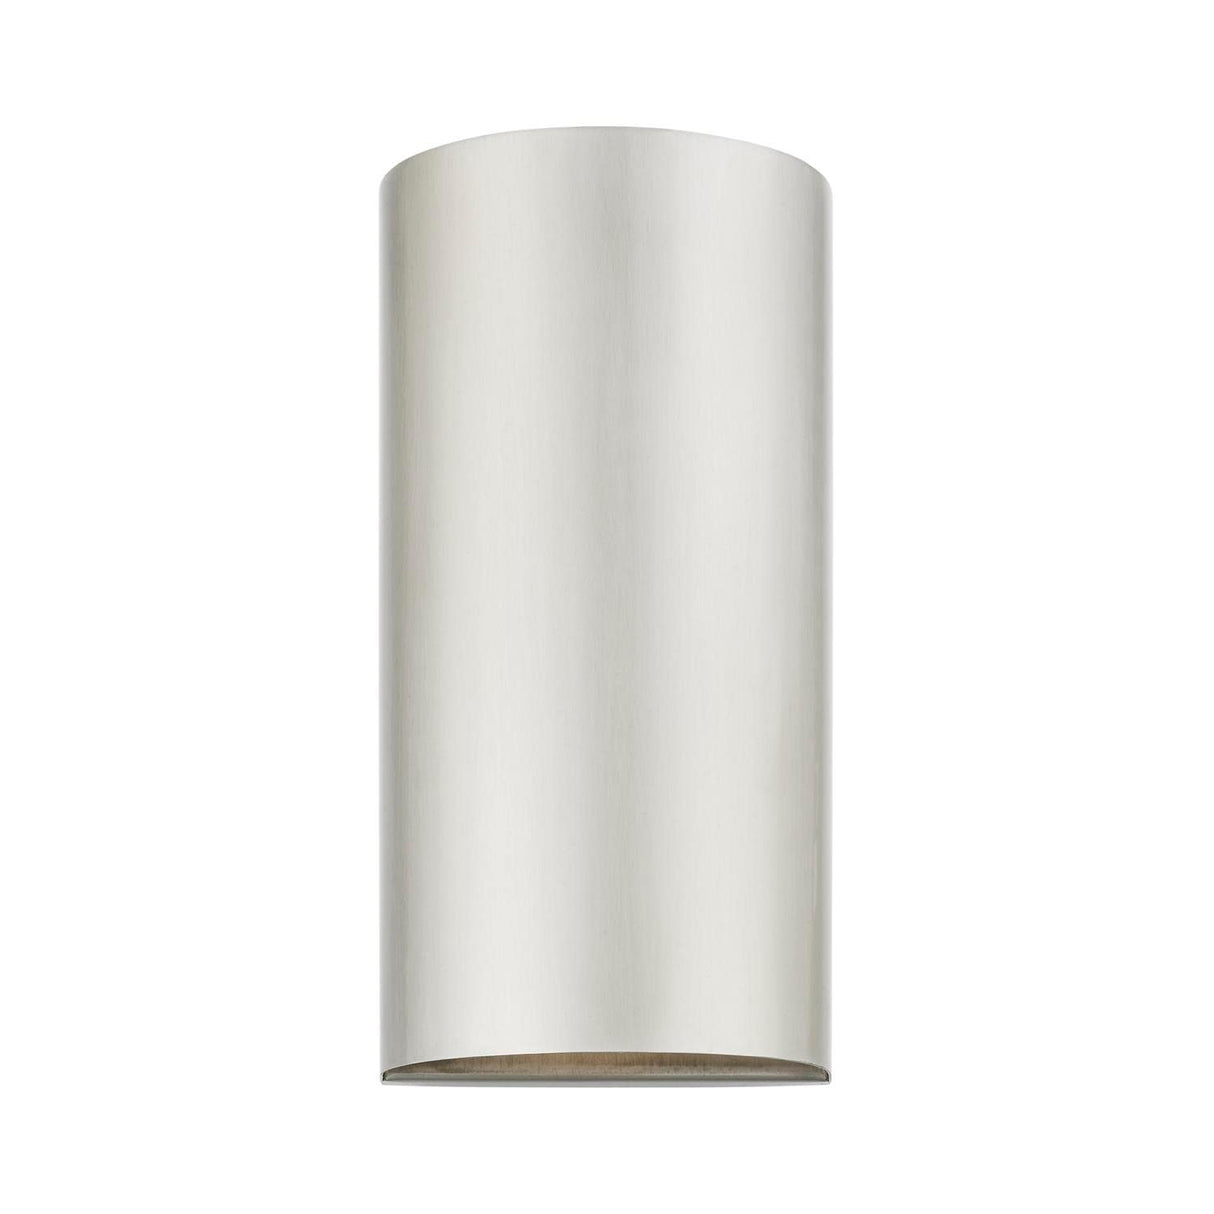 Livex Lighting 22062-91 Bond - 1 Light Medium Outdoor ADA Wall Sconce in Urban Style-10 Inches Tall and 5 Inches Wide, Finish Color: Brushed Nickel